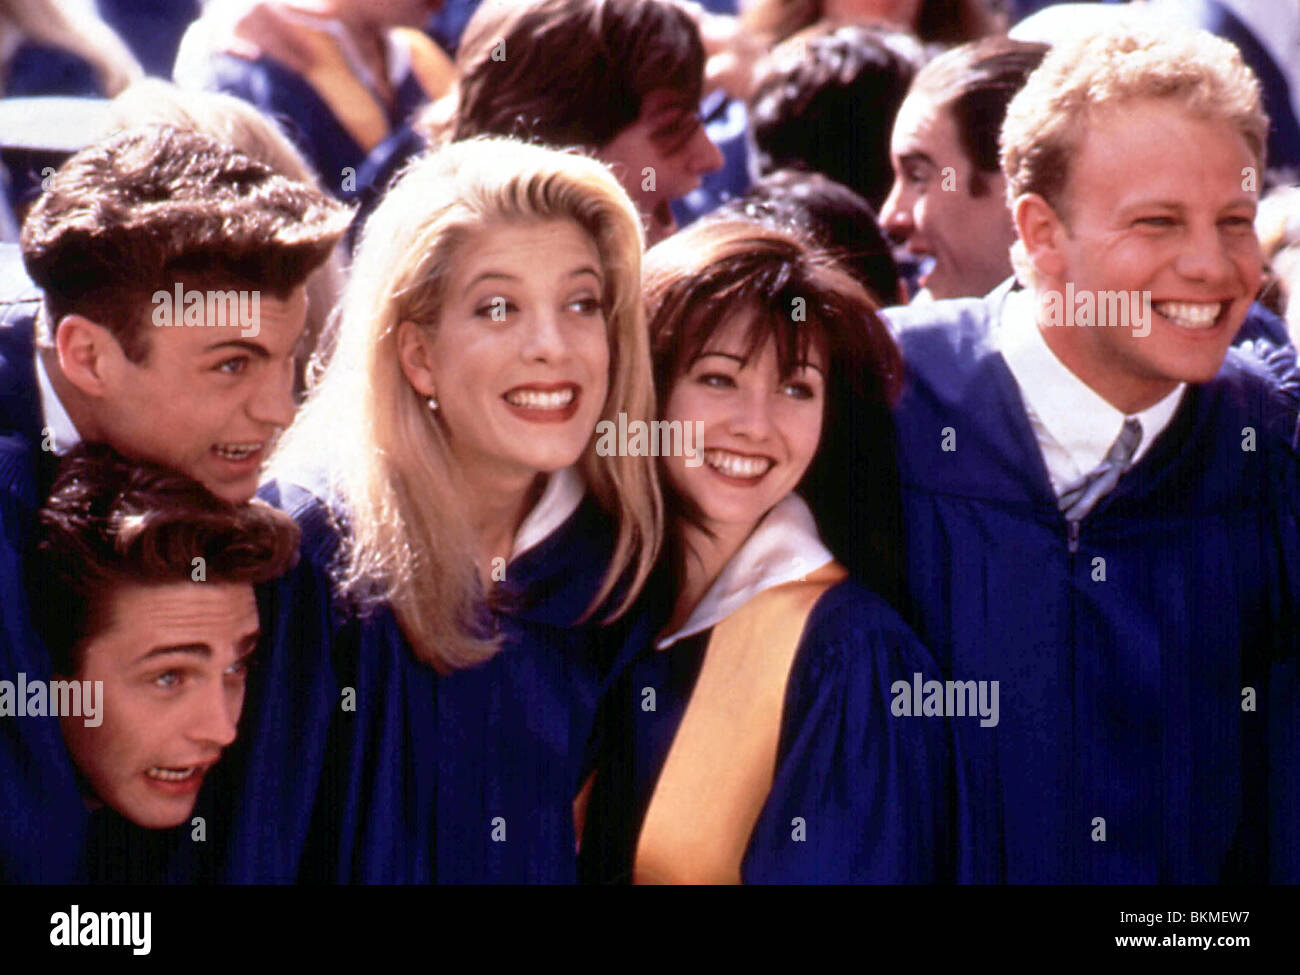 Beverly Hills 90210 Stock Photos & Beverly Hills 90210 Stock Images - Alamy1300 x 975